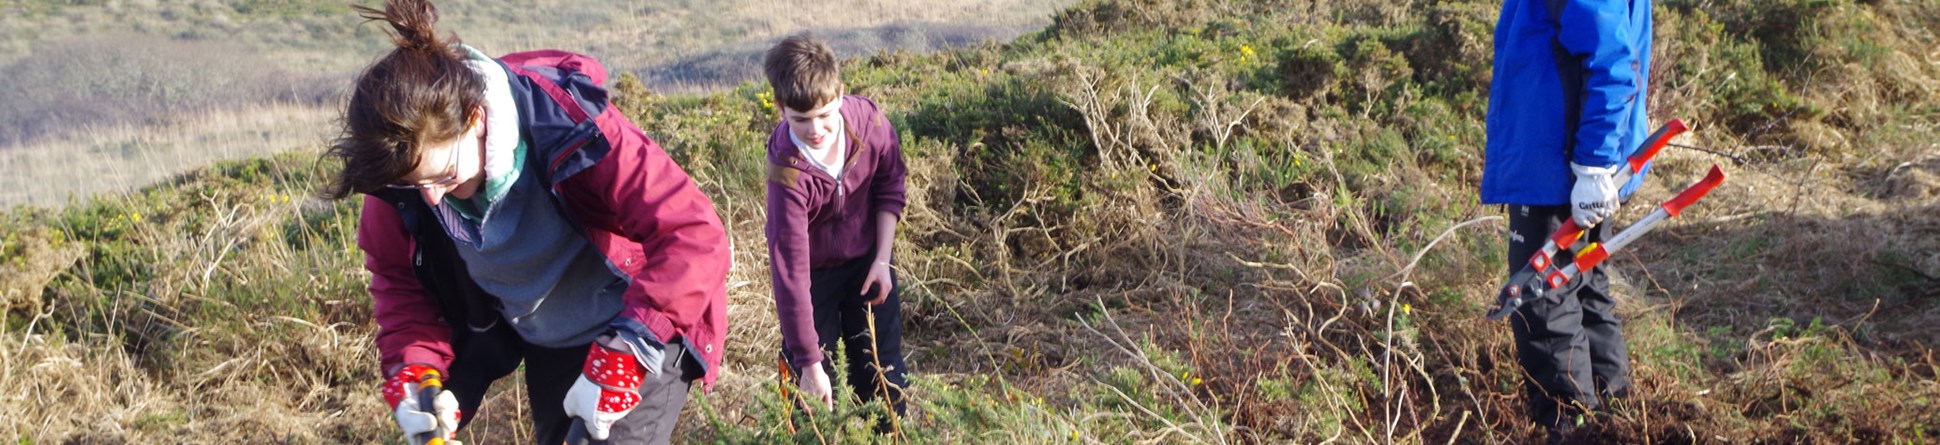 Two adults and a child clearing undergrowth using gardening tools.